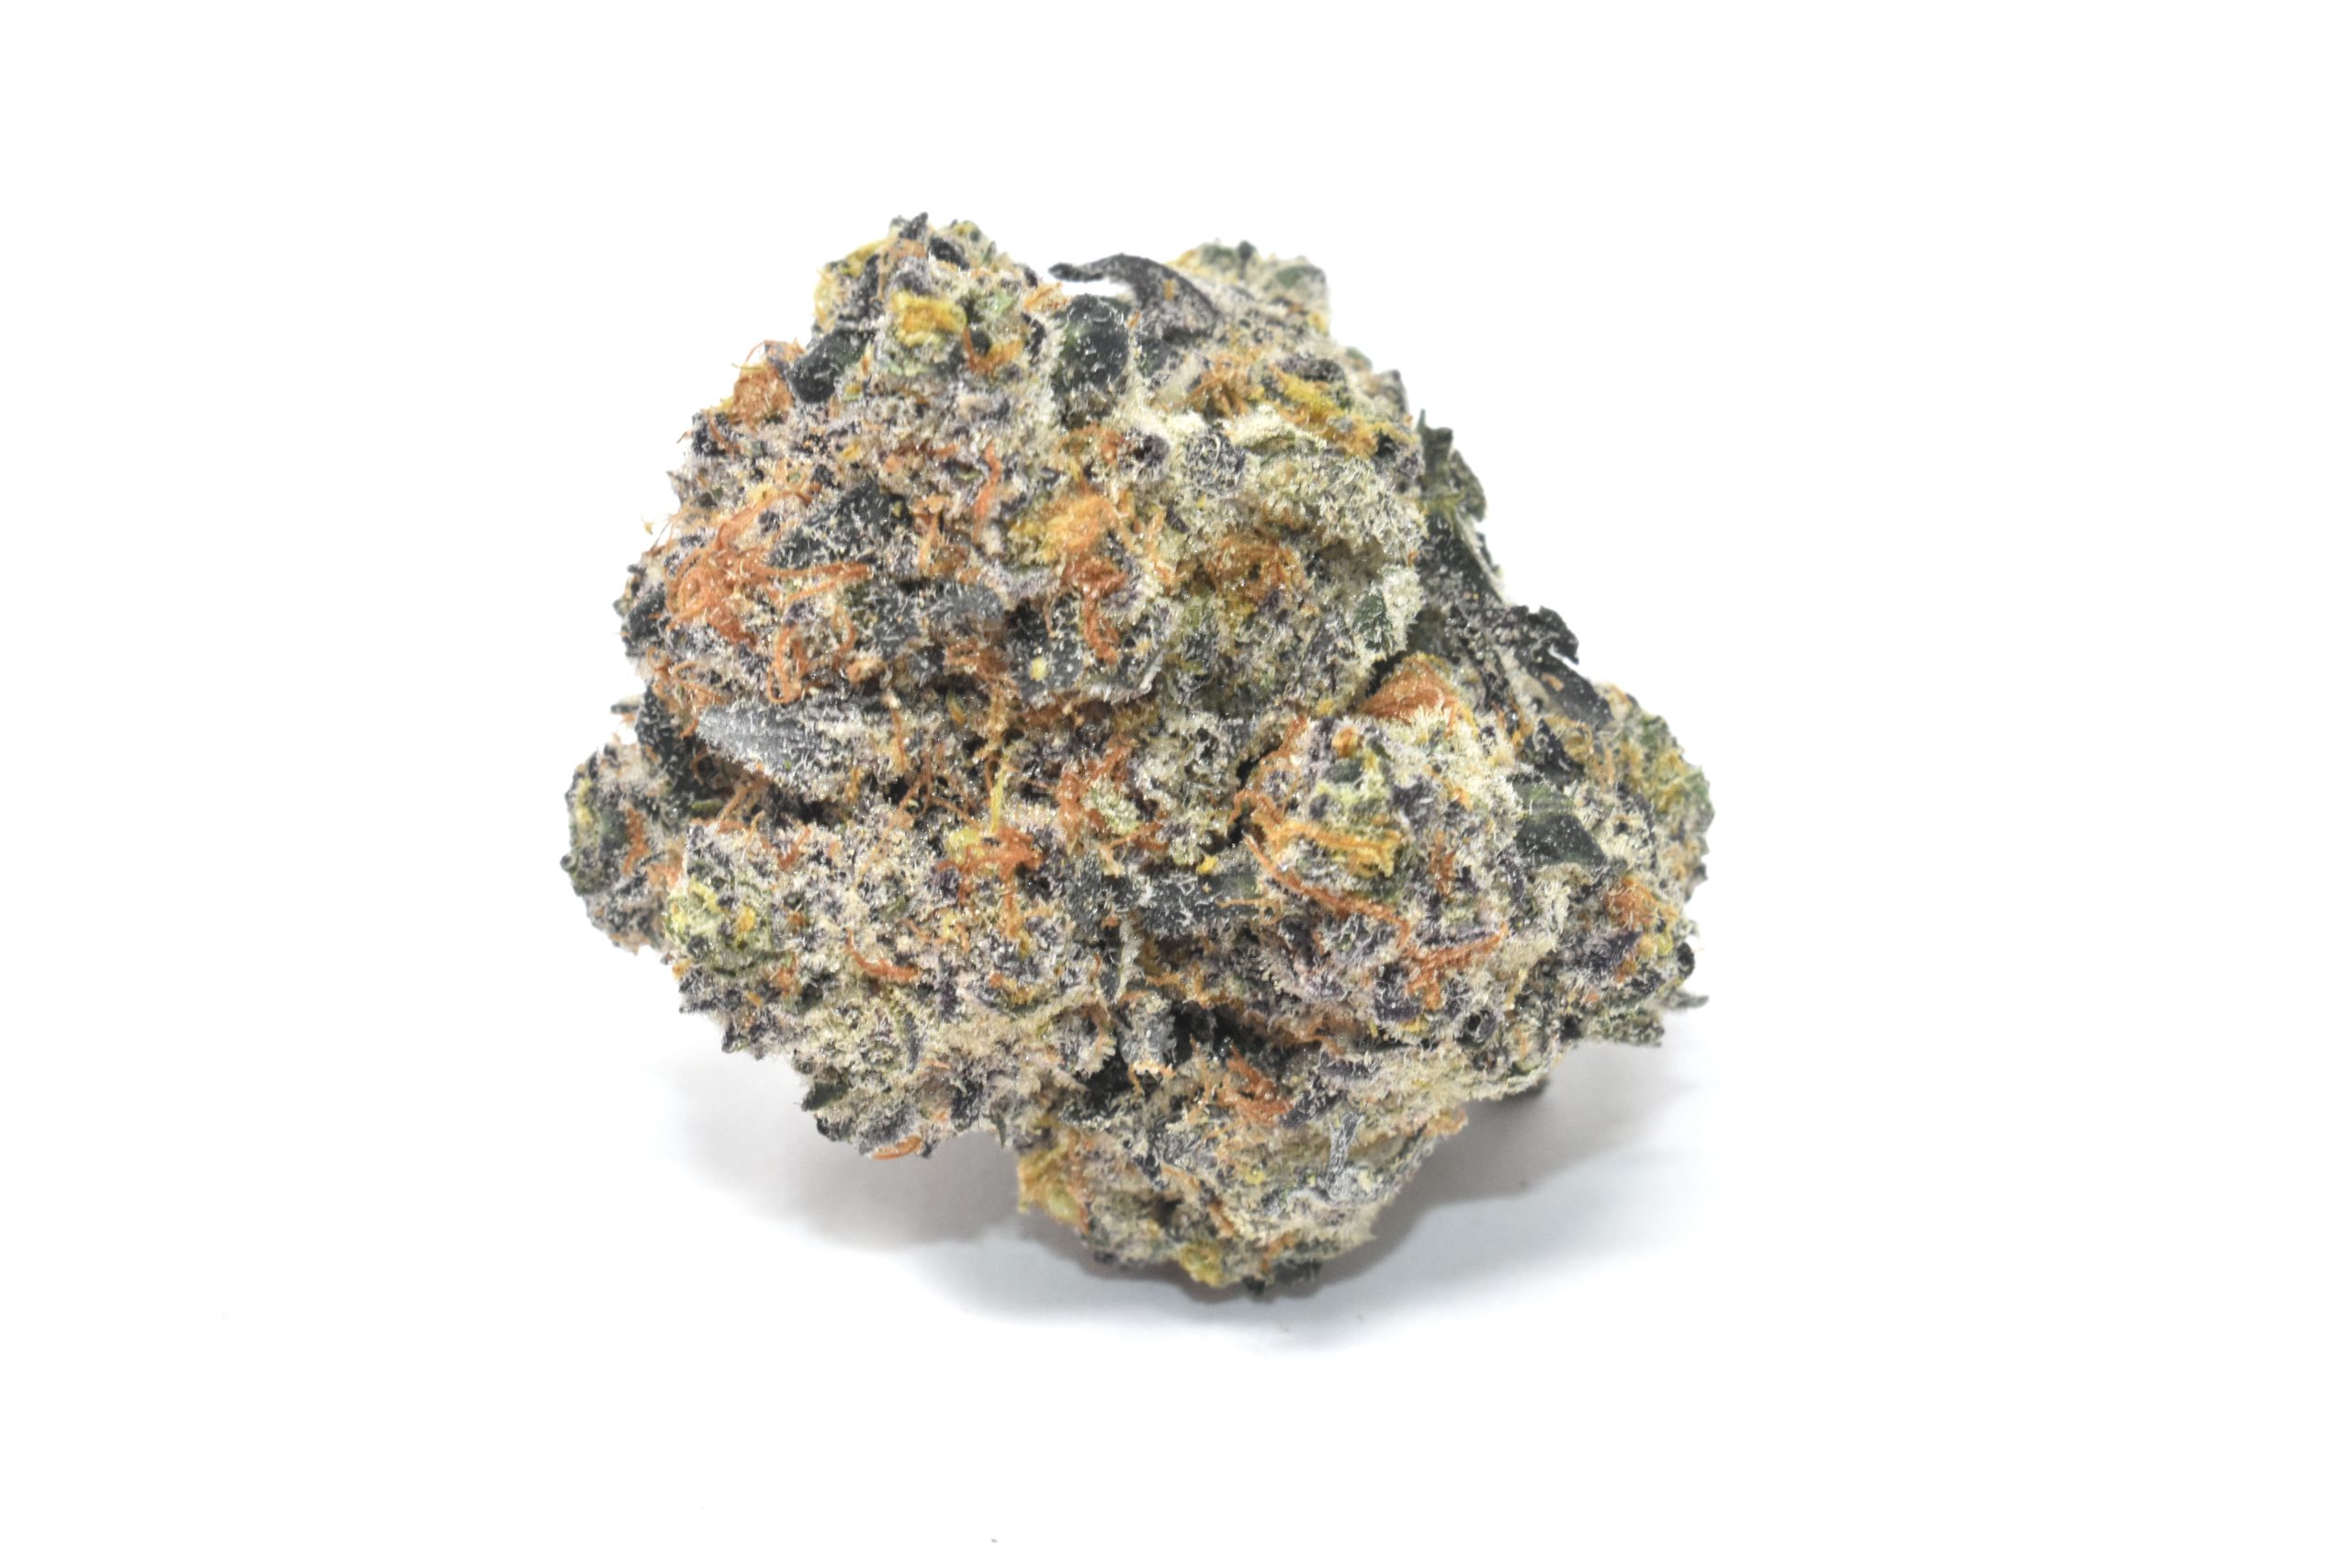 buy-blue-berry-ice-cream-craft-quads-at-chronicfarms.cc-online-weed-dispensary-in-canada